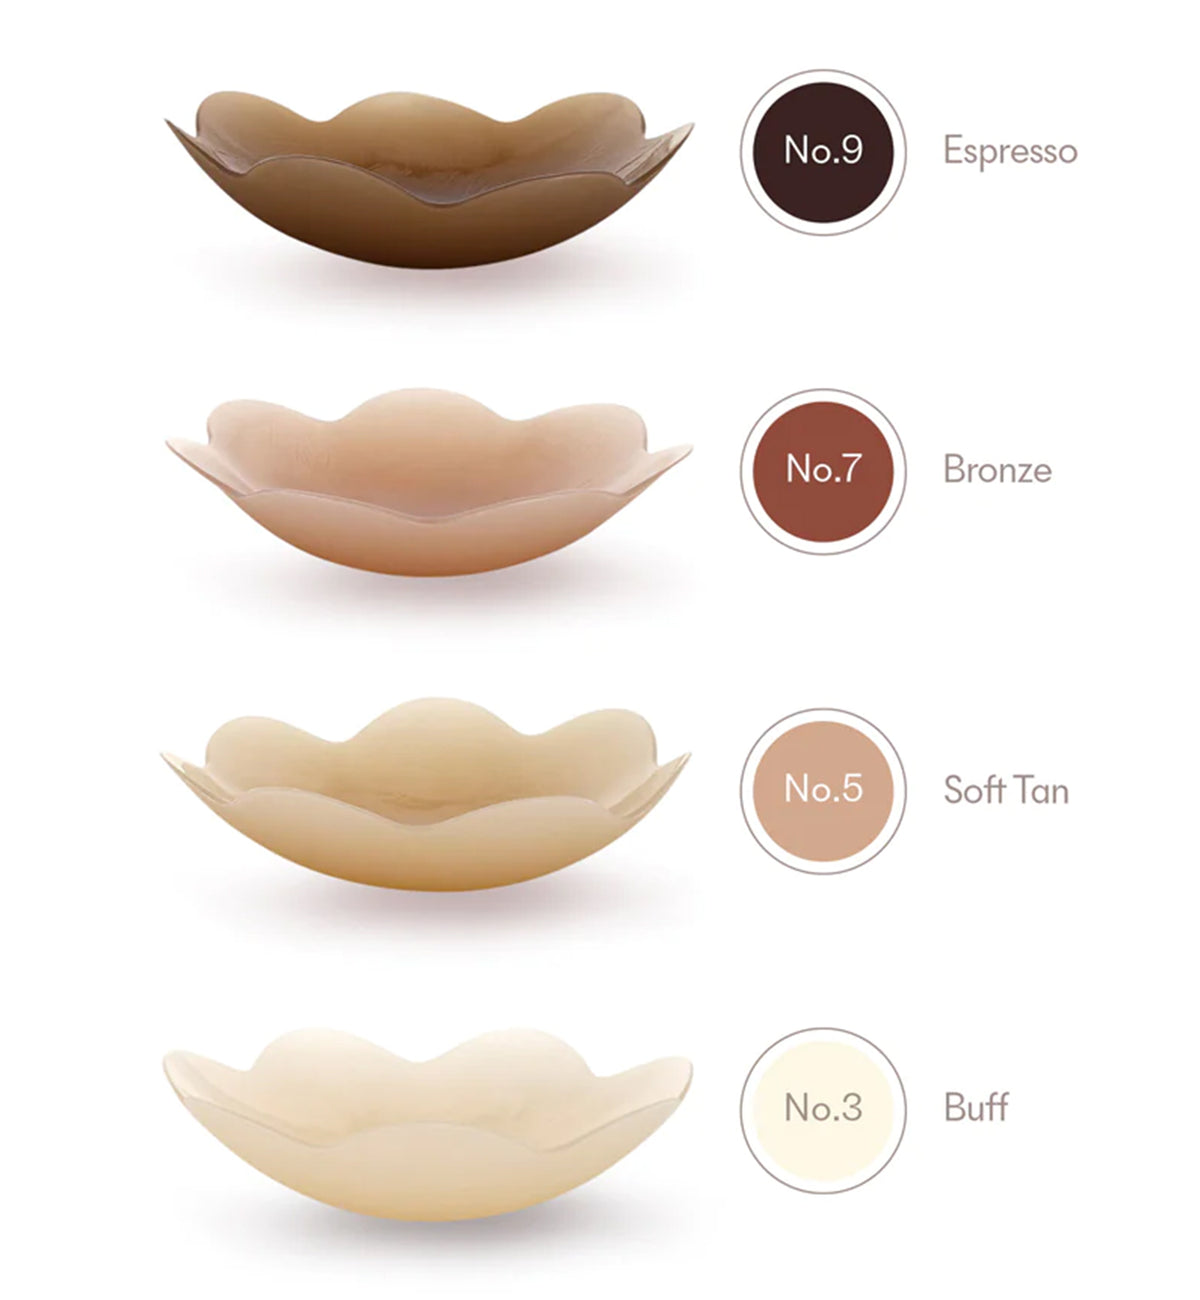 NOOD No-Show Nipple Covers,Nood 5 - Nood 5,One Size